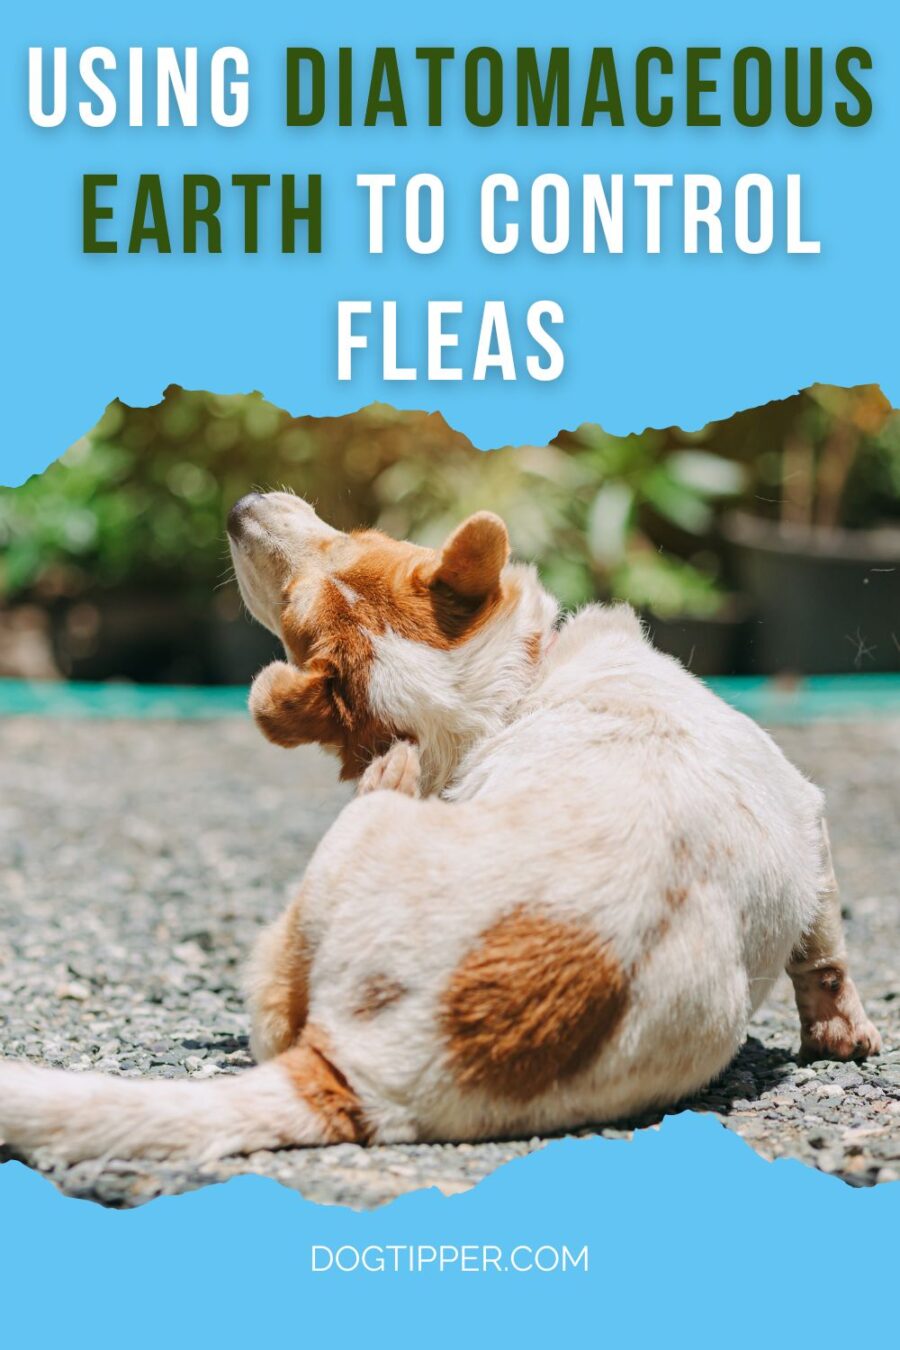 How to use diatomaceous earth (DE) to control fleas in your yard and in dog bedding